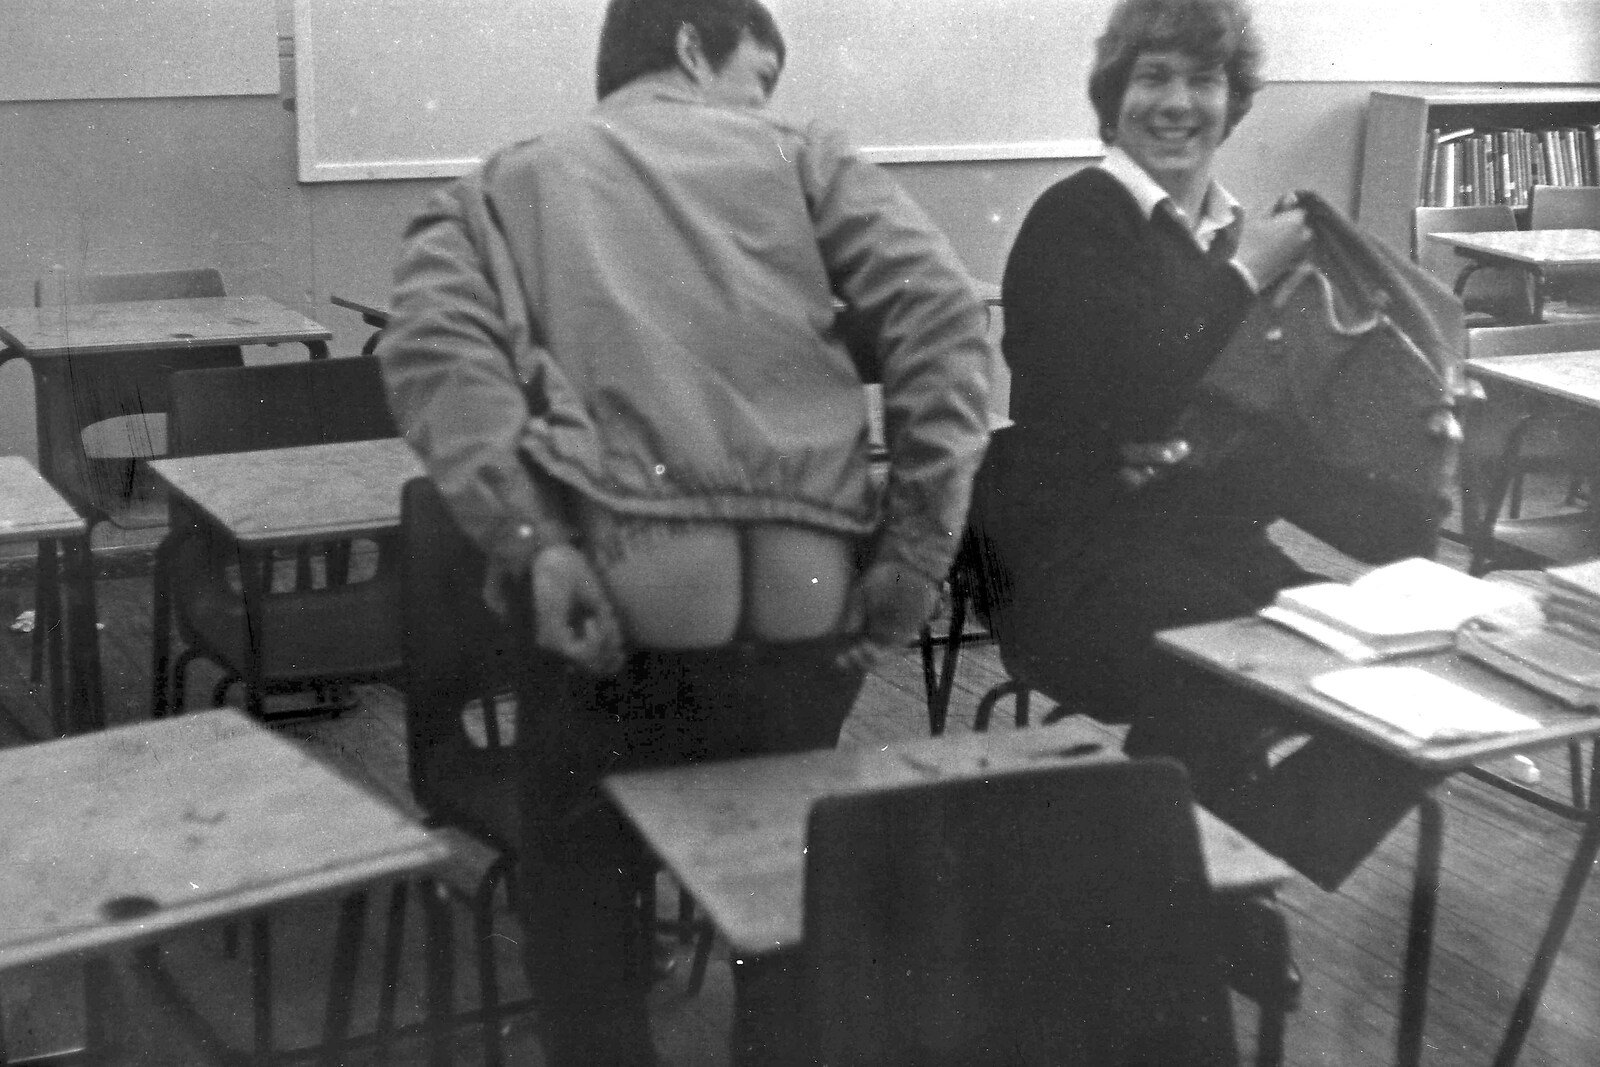 Someone does a moonie from Learning Black-and-White Photography, Brockenhurst College, Hampshire - 10th March 1985